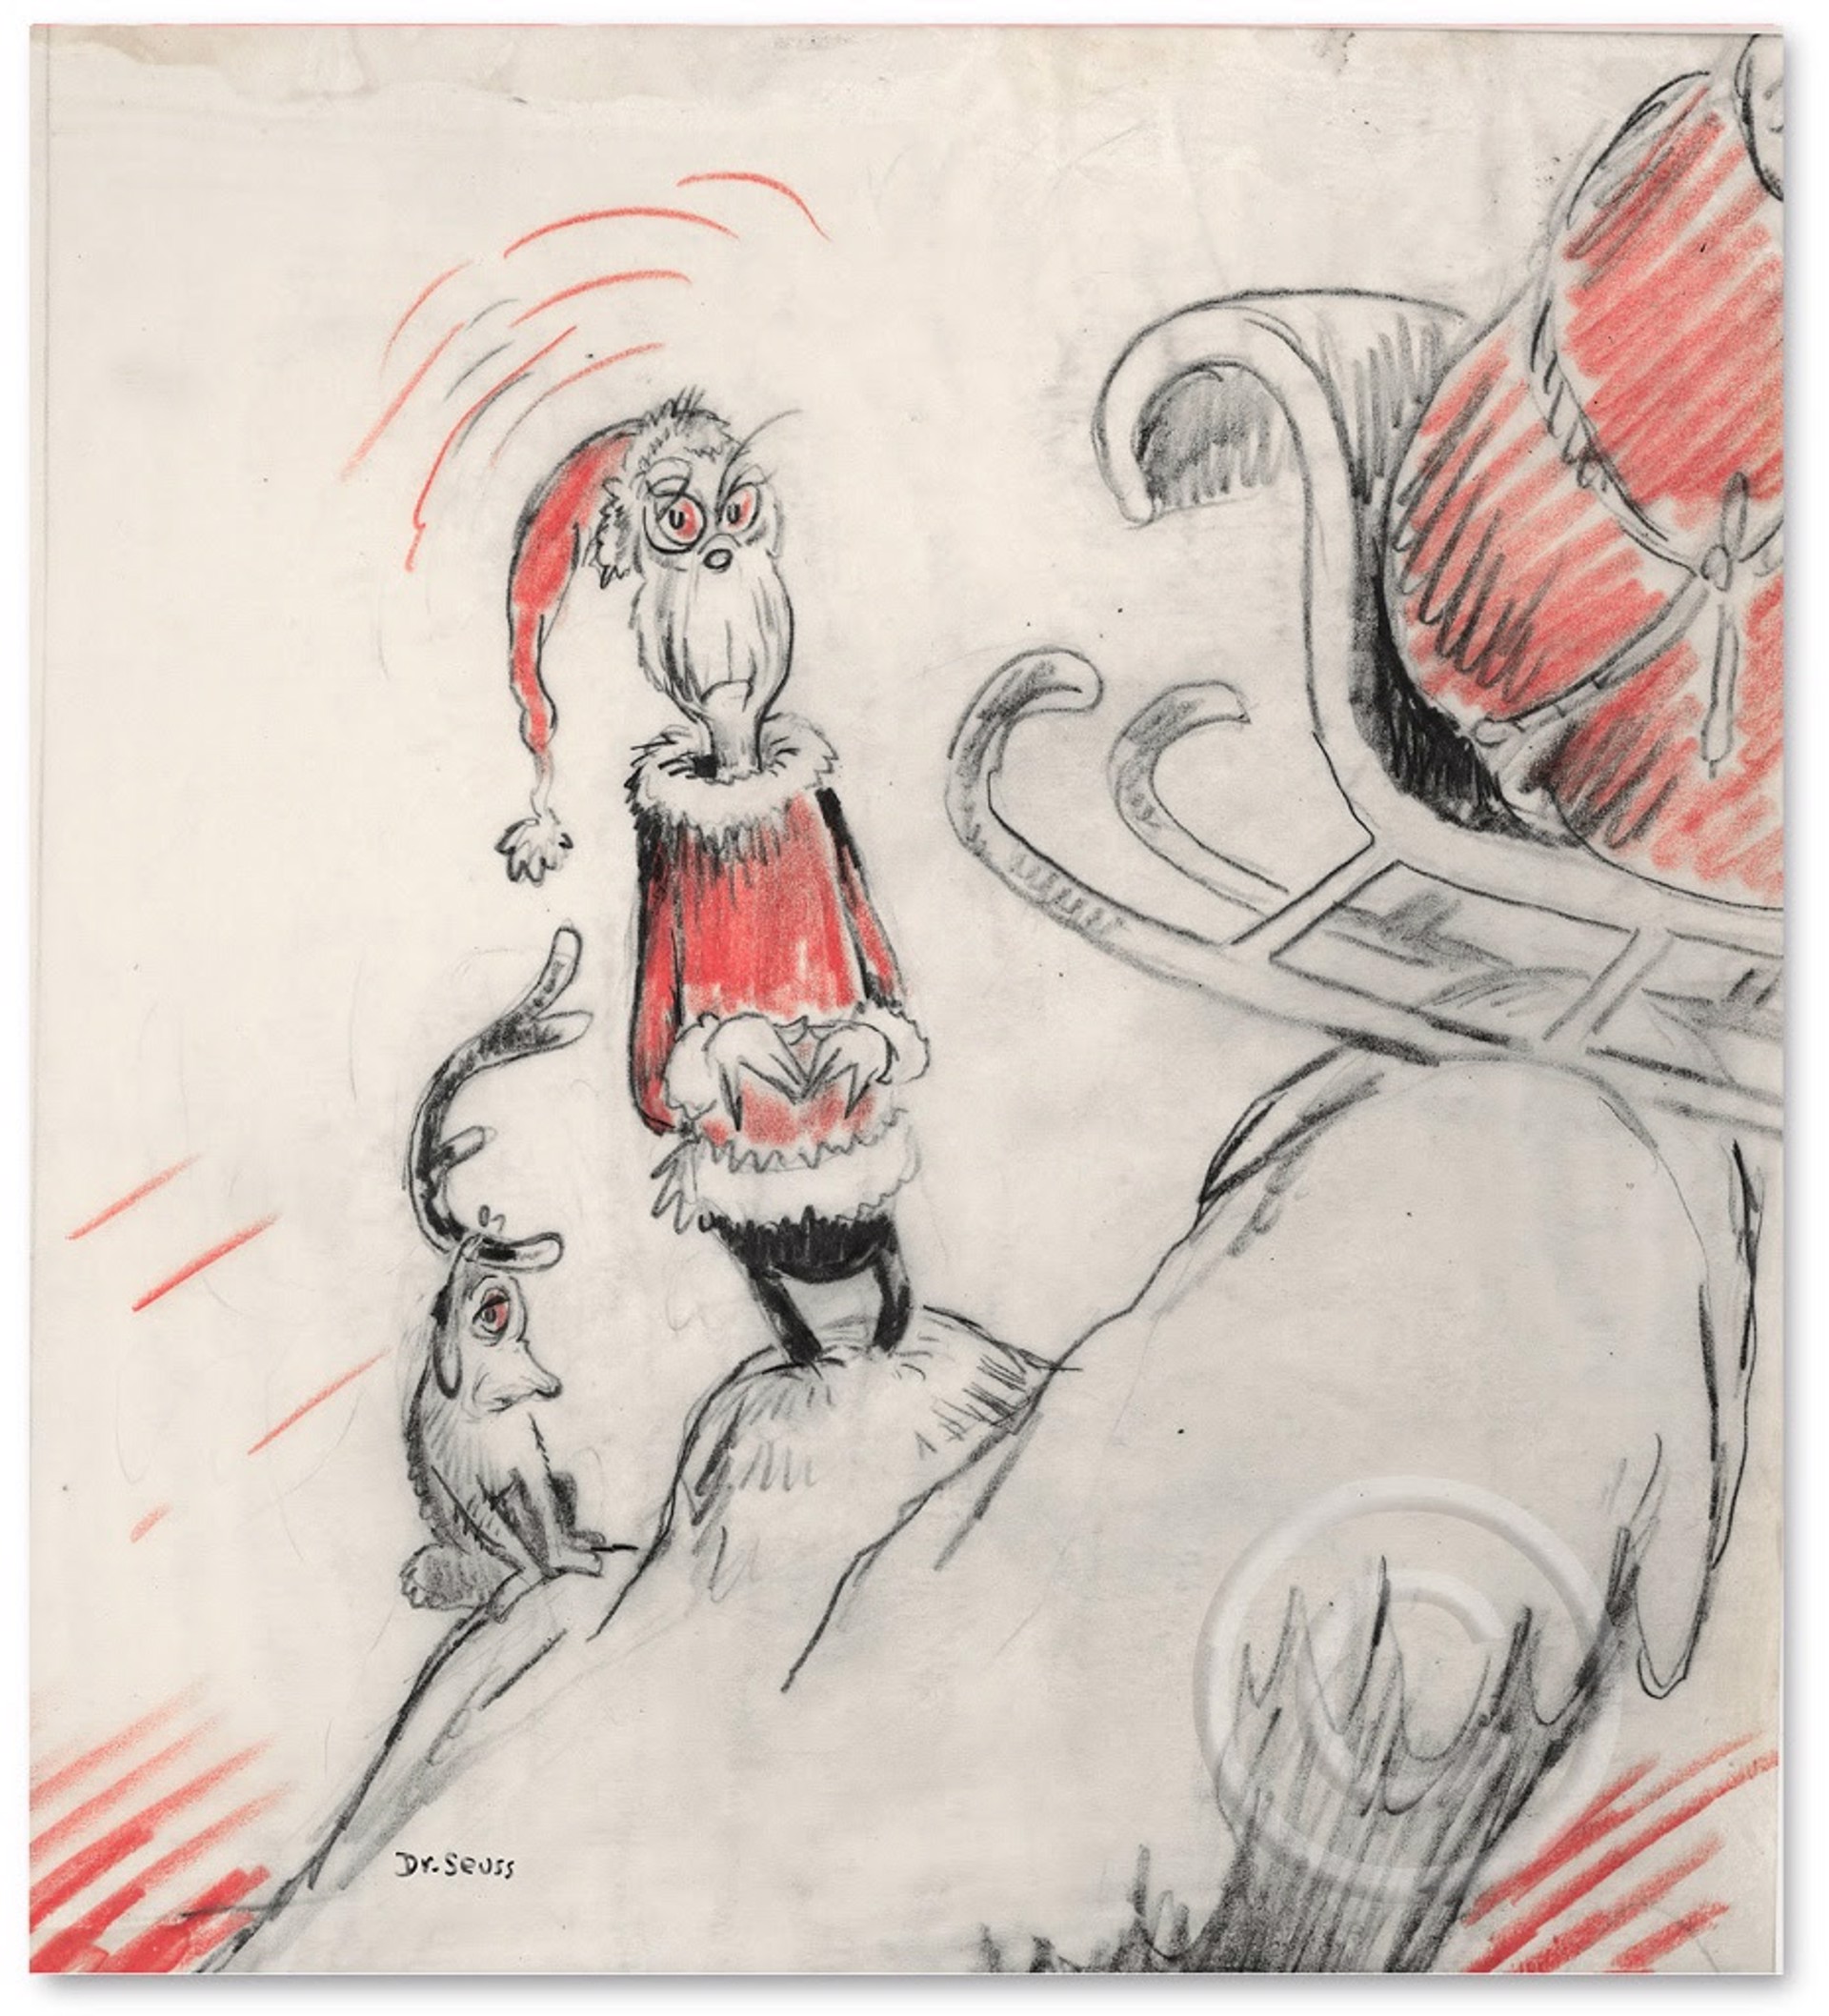 The Grinch 60th Anniversary by Theodor Seuss Geisel